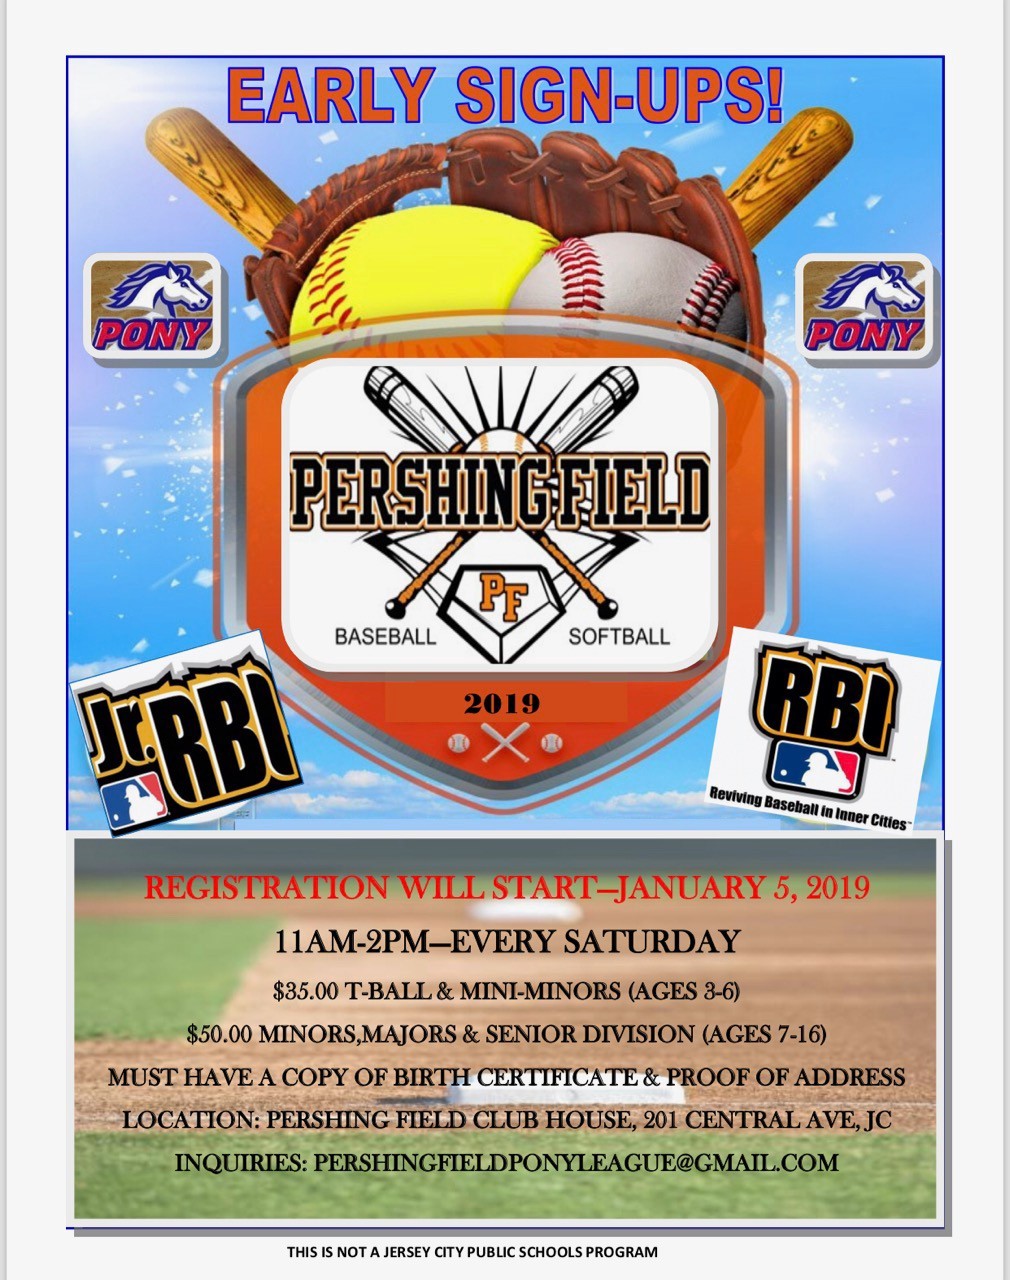 Registration for Pershing Field Baseball in Jersey City